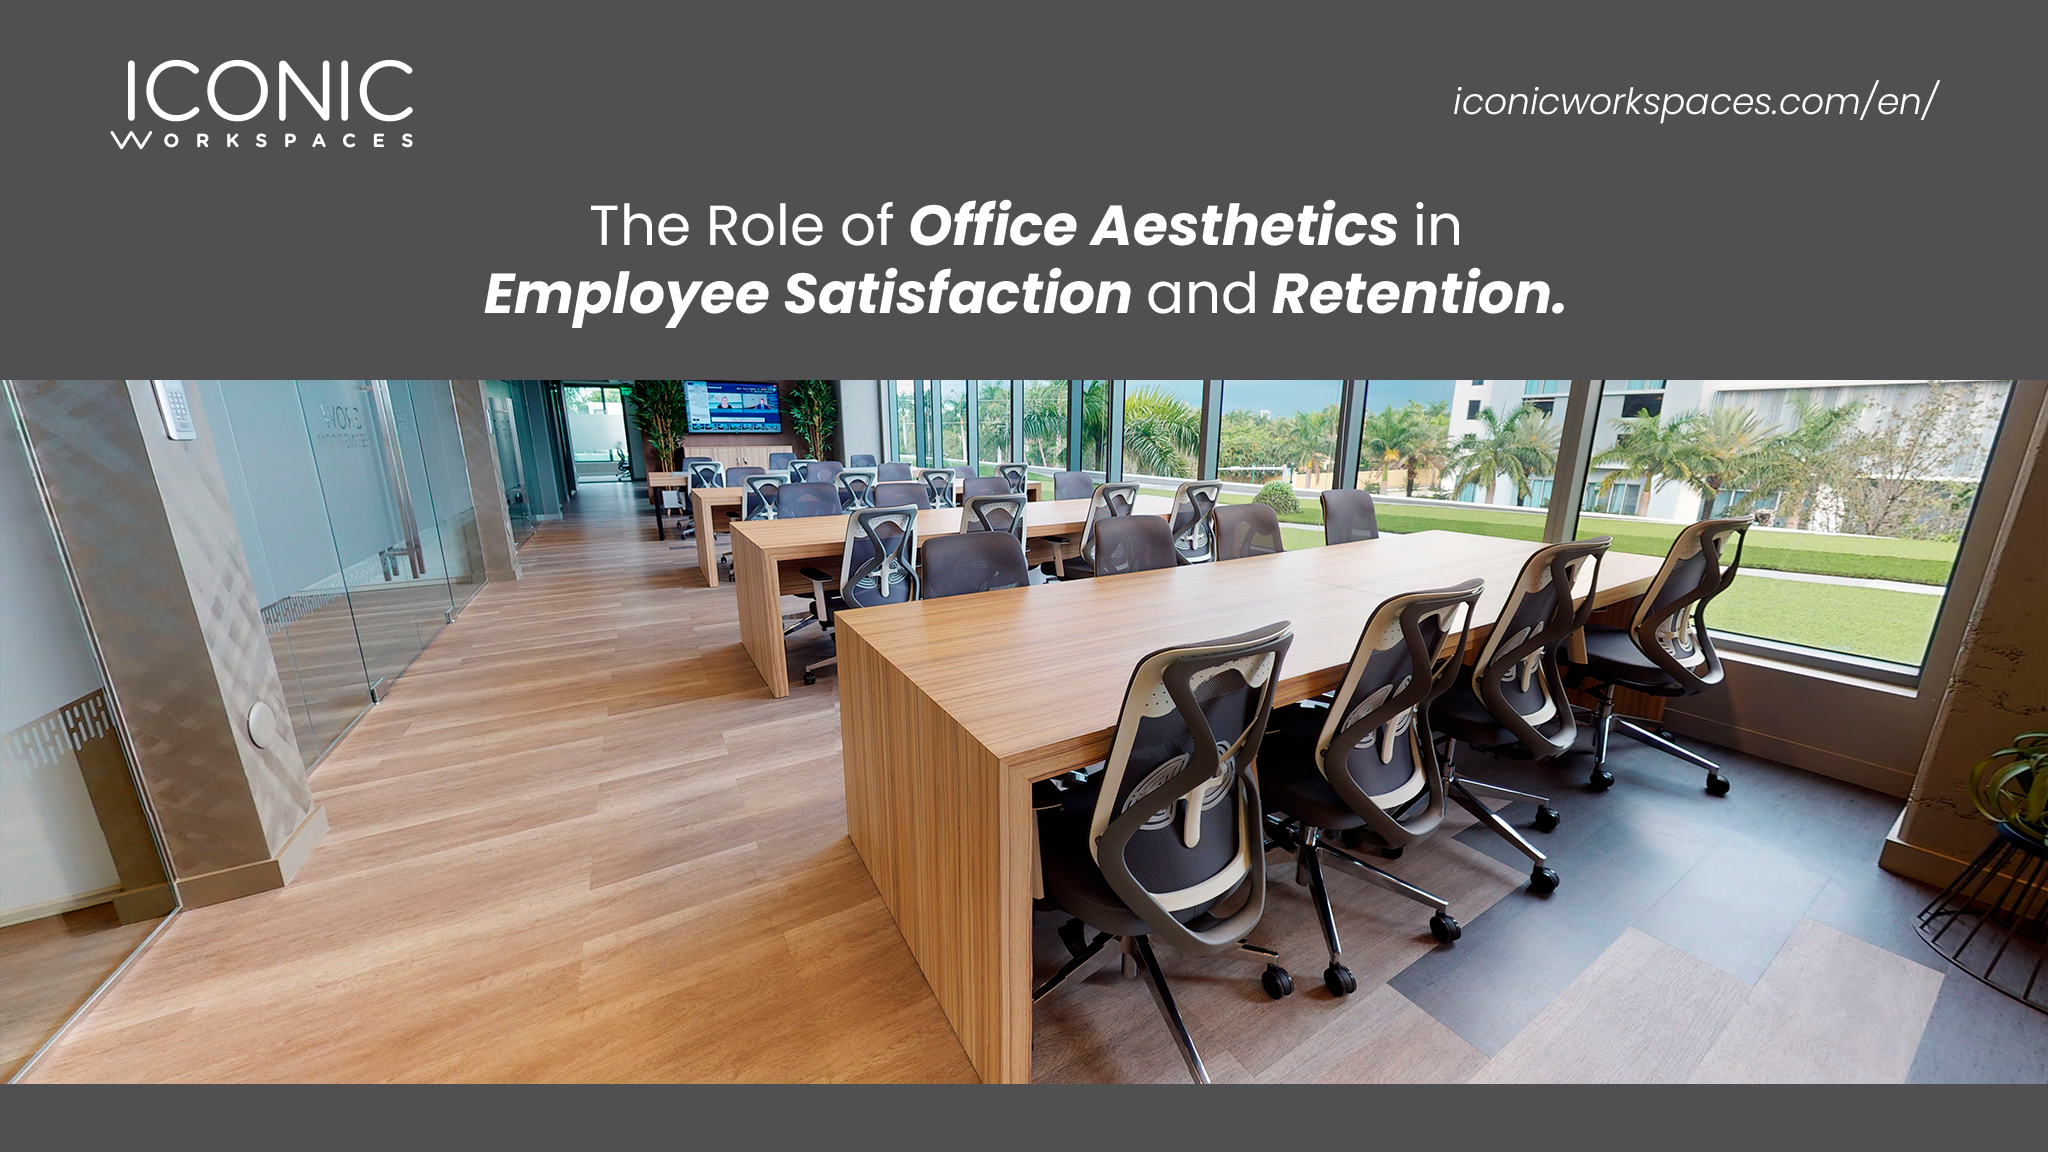 The Role of Office Aesthetics in Employee Satisfaction and Retention